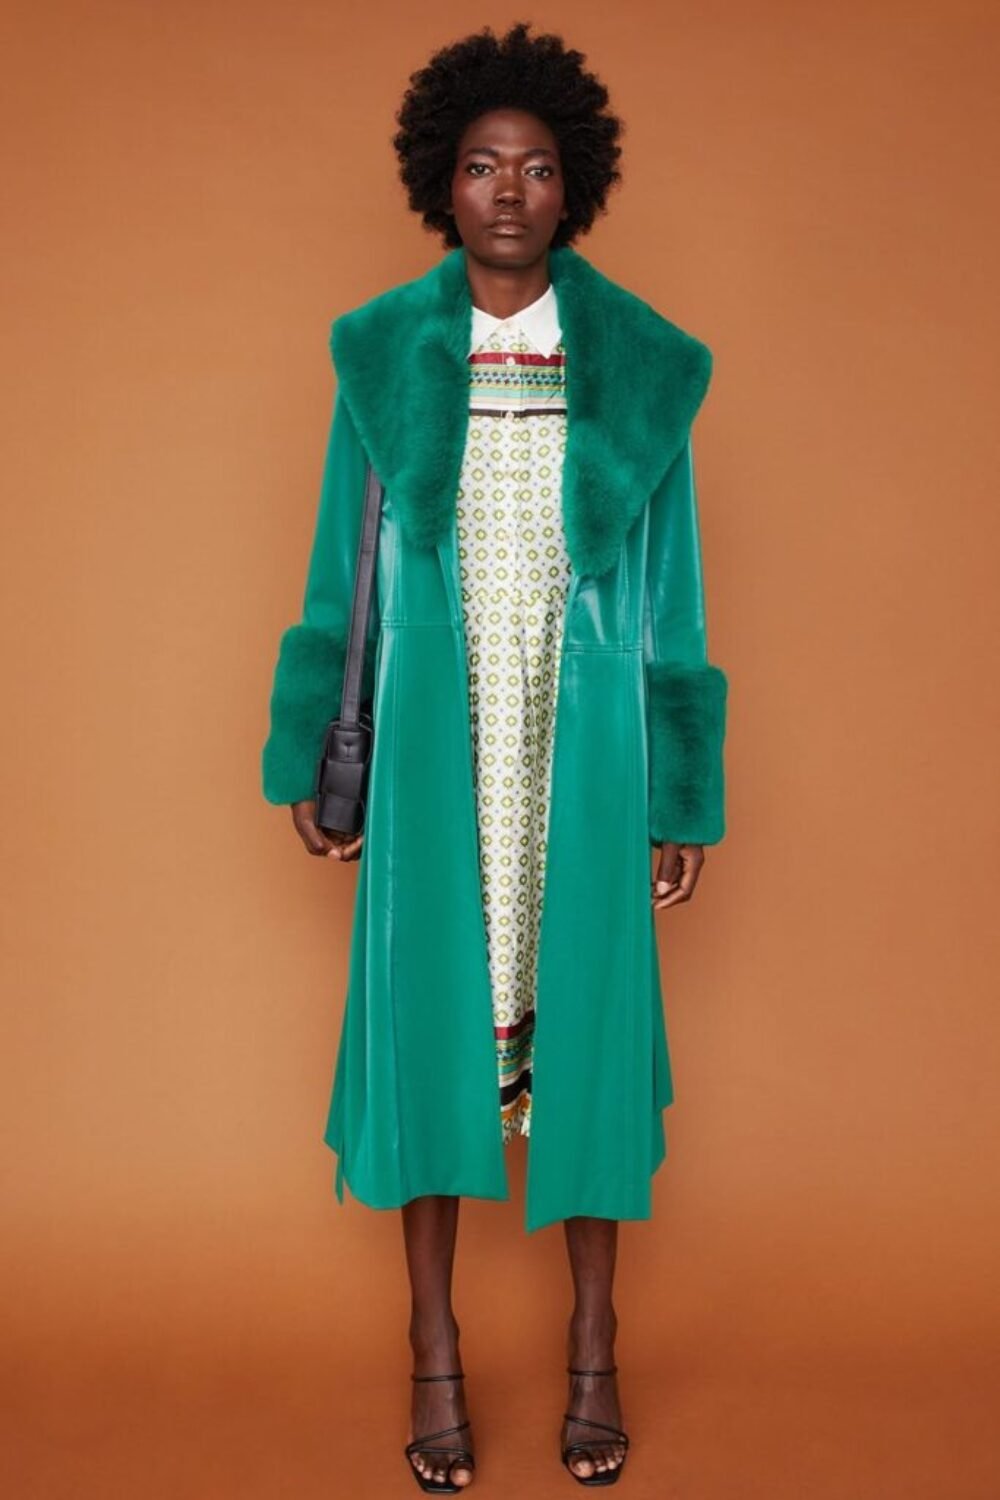 Shop Lux Green Trench Style Belted Coat with Faux Fur Cuffs and Collar and women's luxury and designer clothes at www.lux-apparel.co.uk